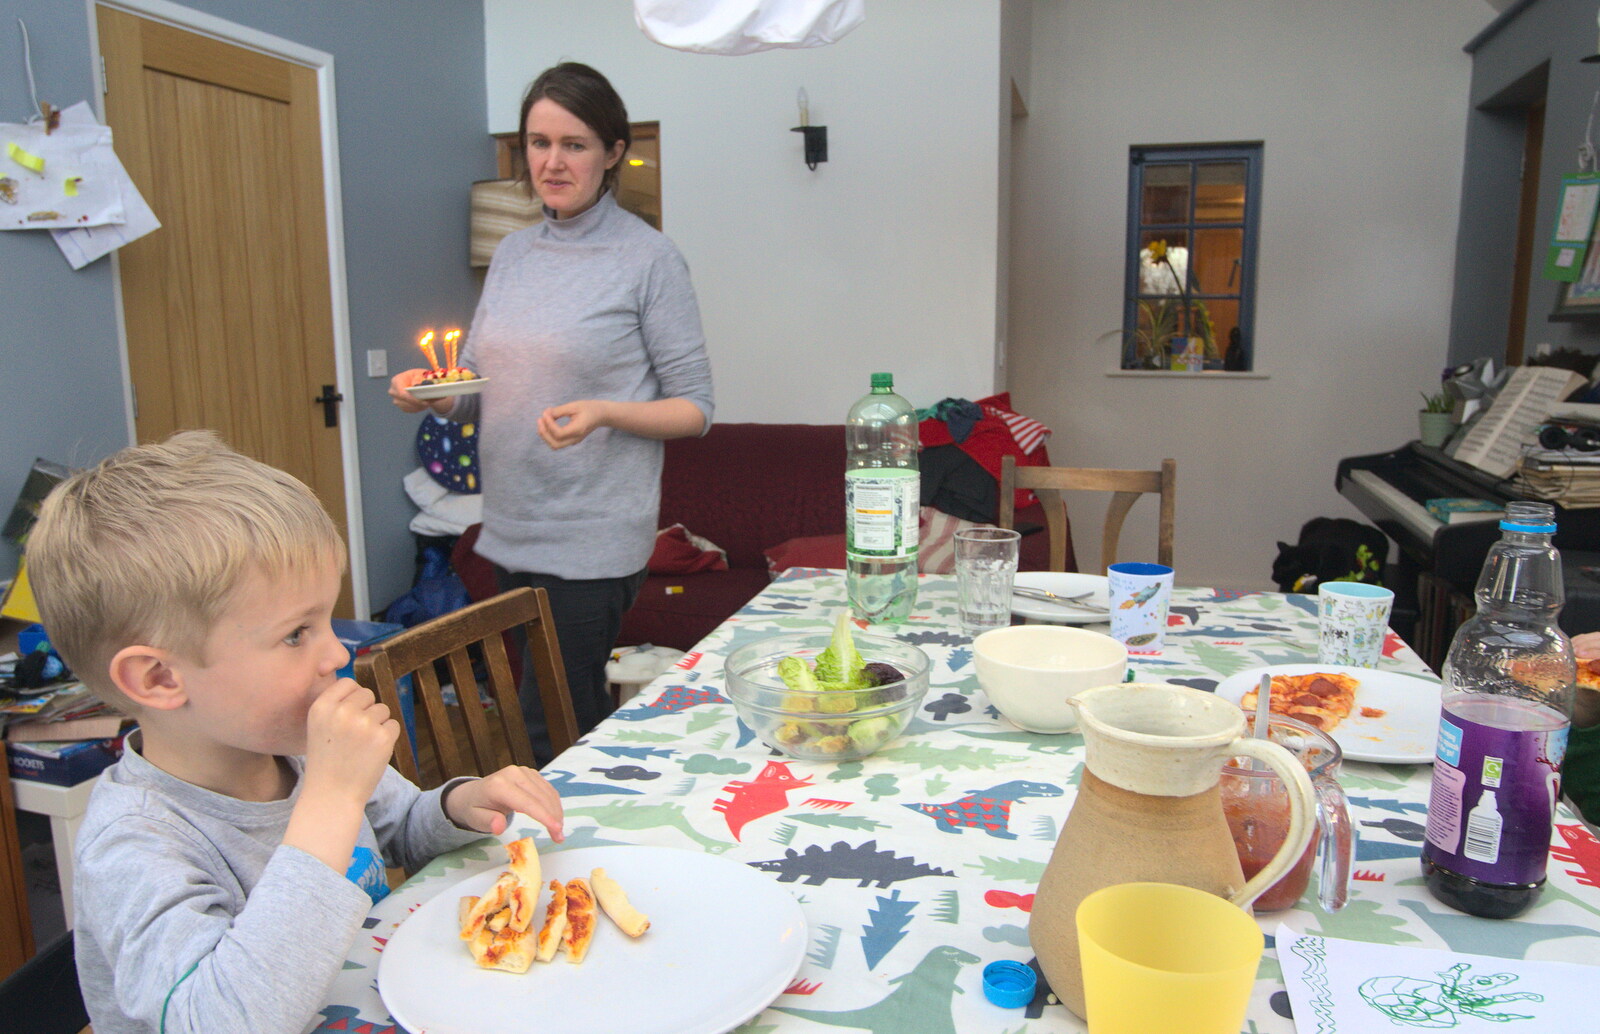 Harry eats home-made pizza from Harry's Birthday, Brome, Suffolk - 28th March 2016